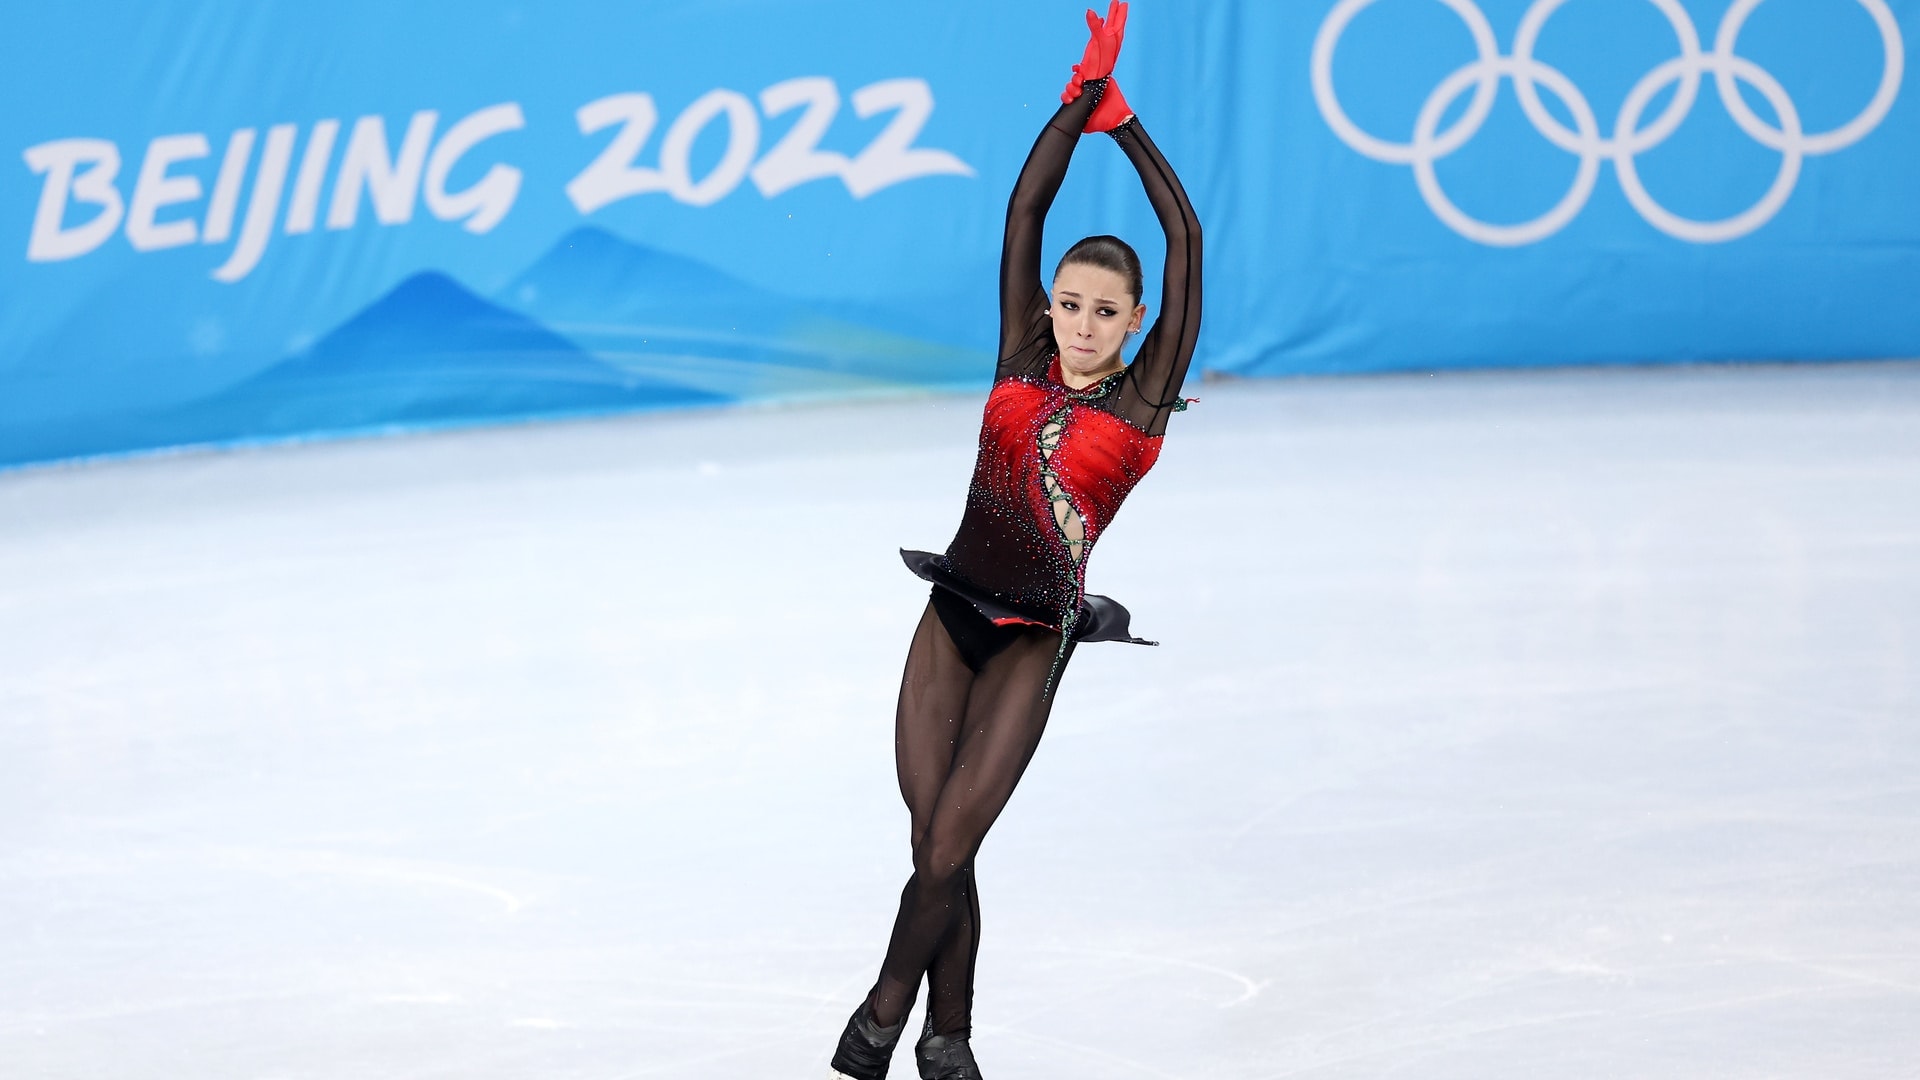 Zhu Yi, US-born Figure Skater Competing for China, Faces Backlash After Falls